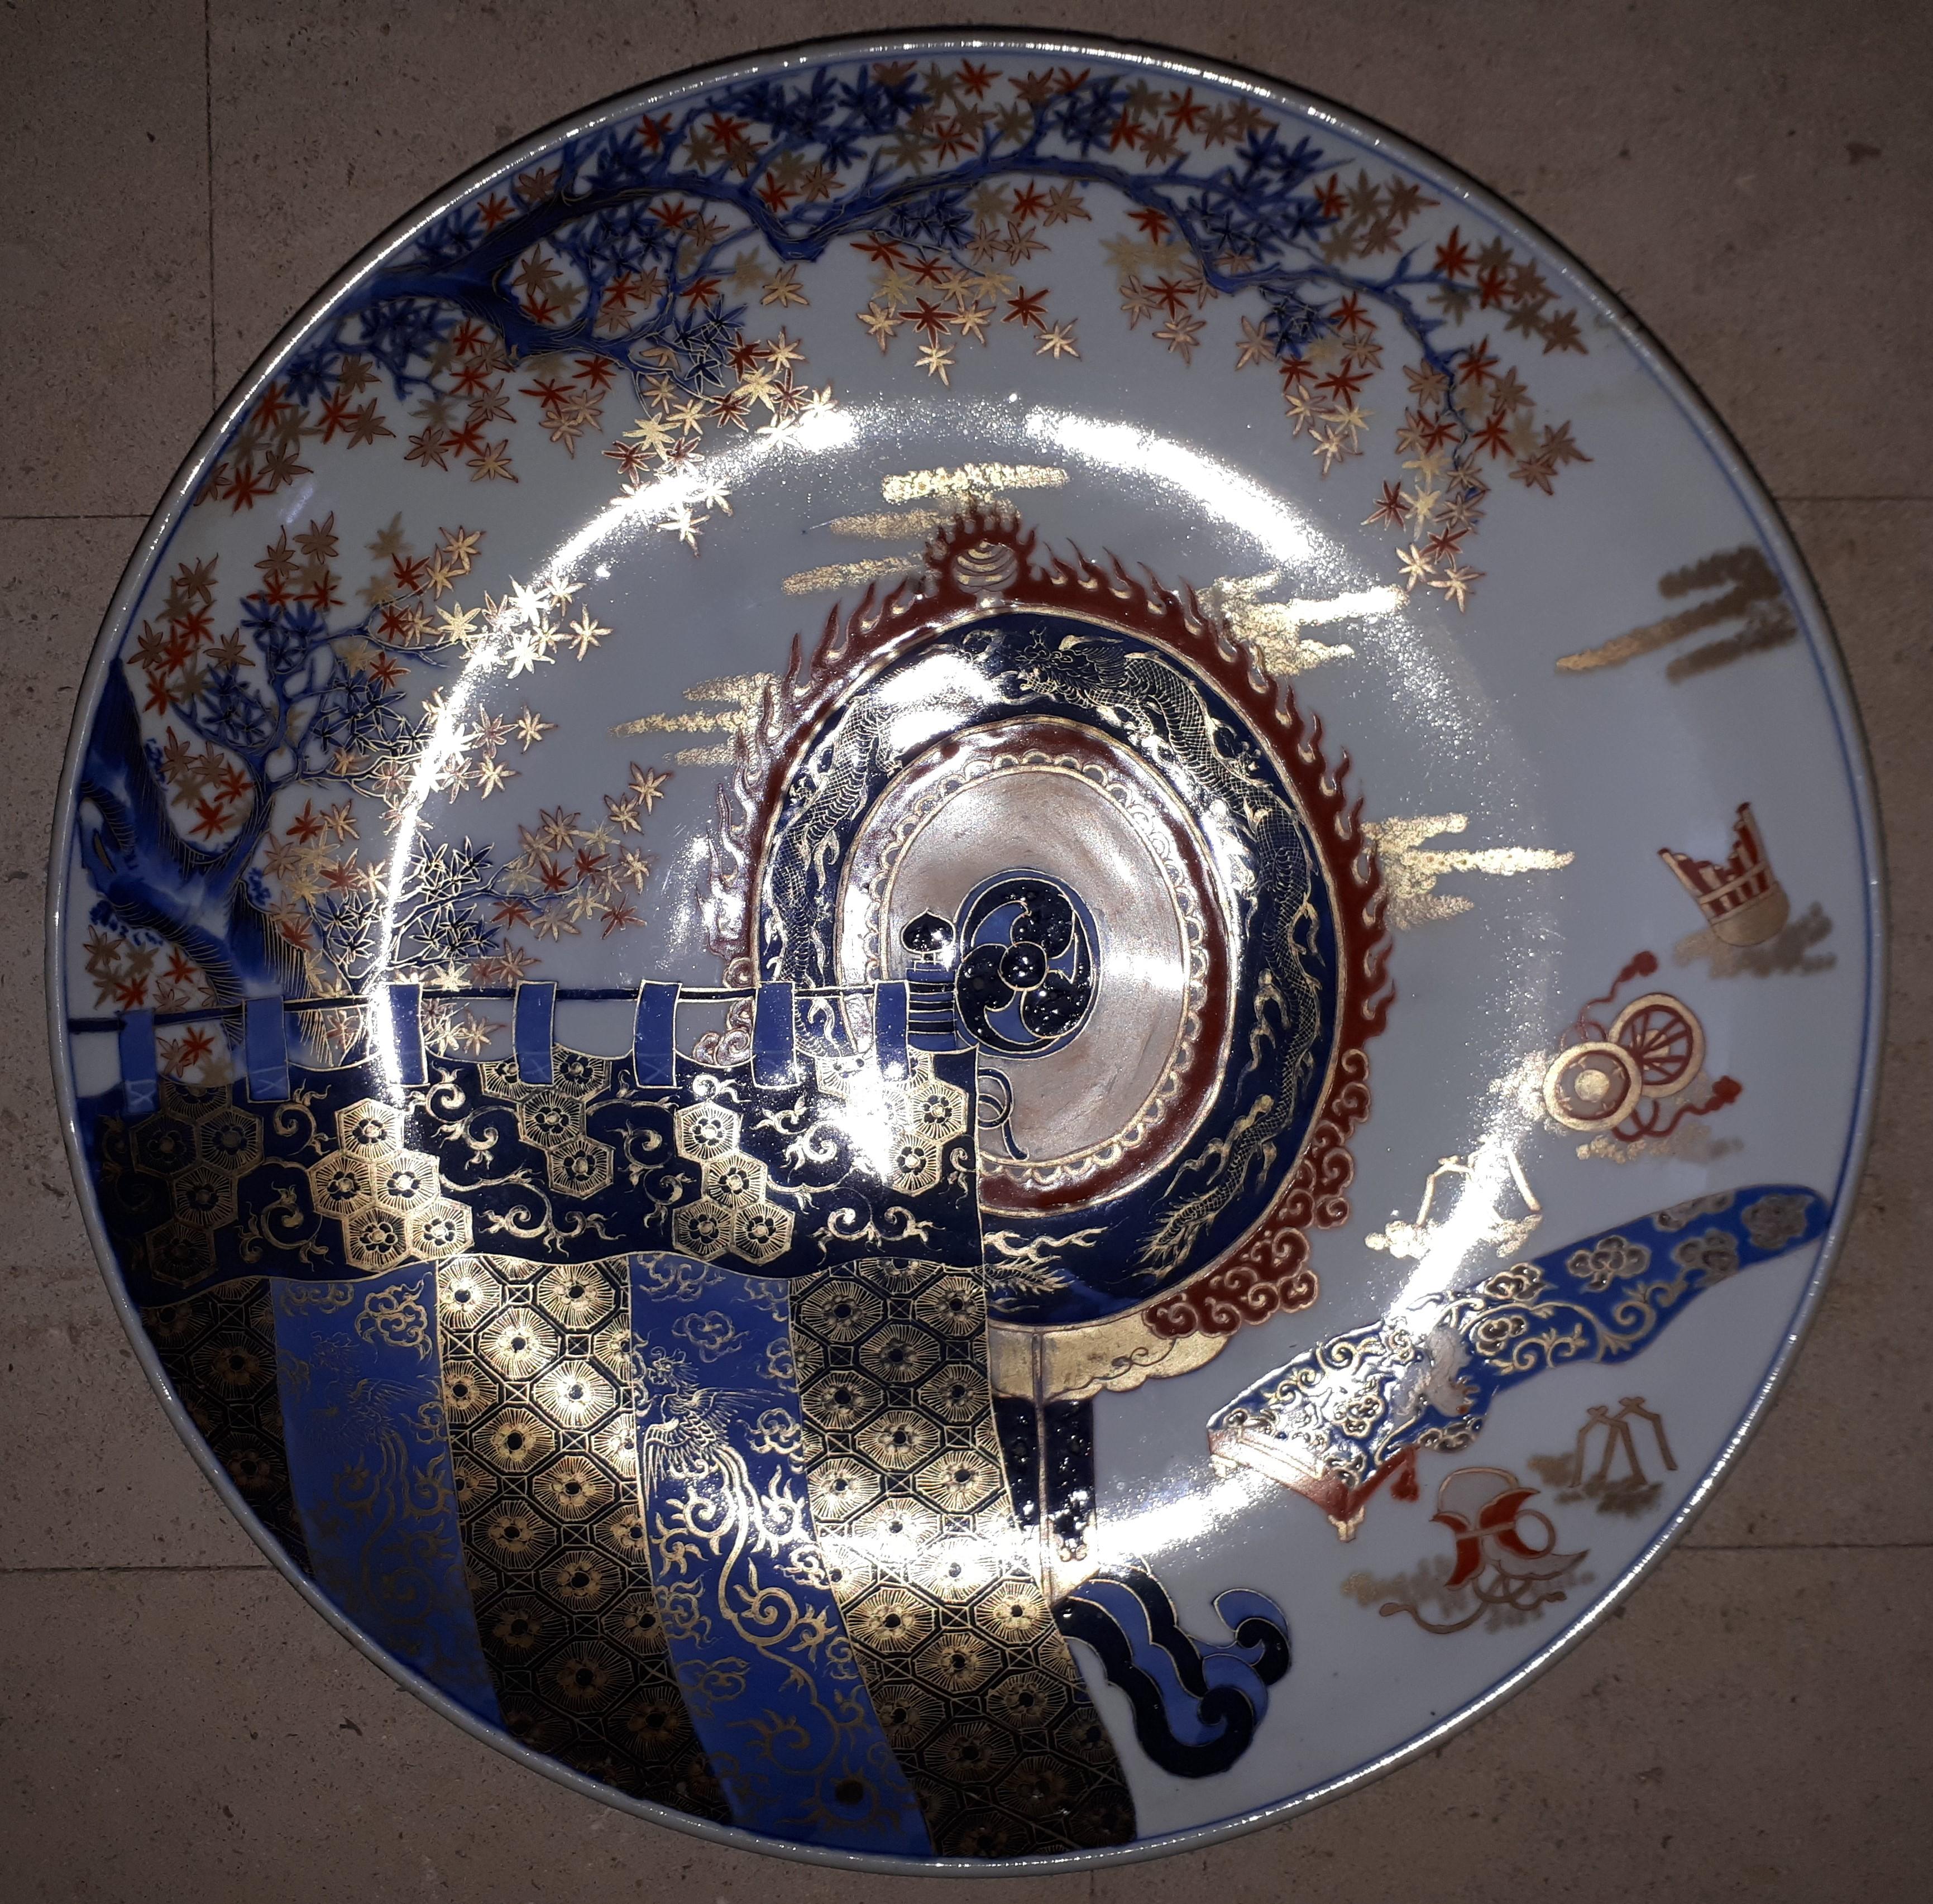 Large Arita porcelain dish, with polychrome decoration and gilt highlights of standards placed under a maple tree.
Japan, late 19th century.